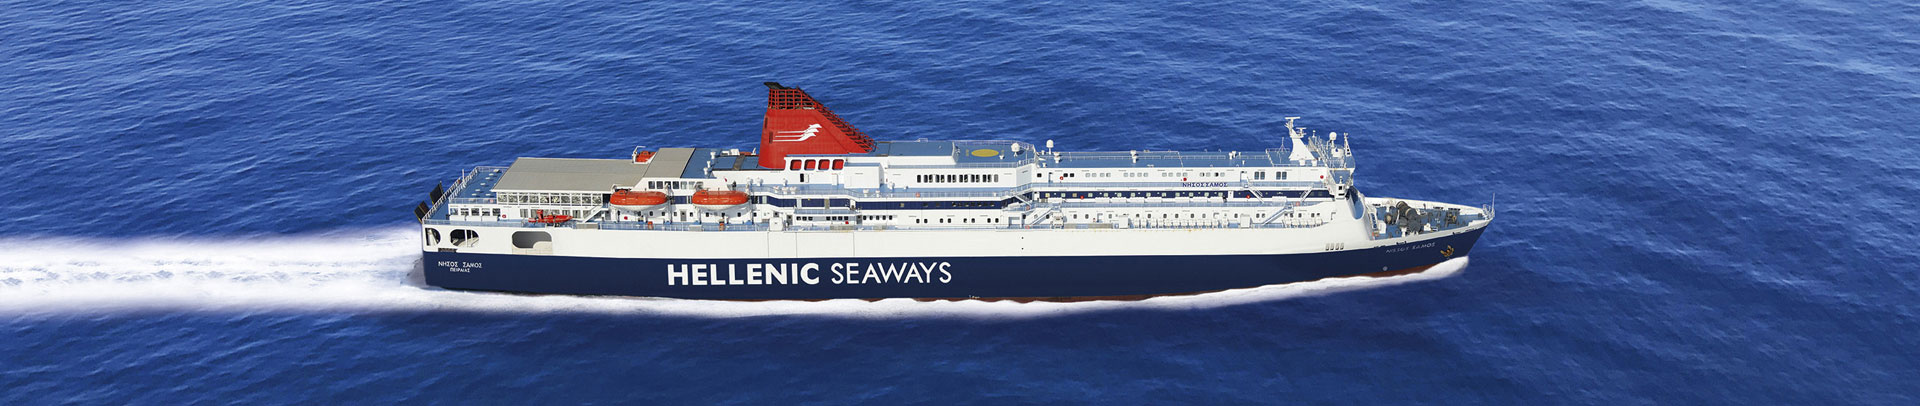 Main top decorational image for Hellenic Seaways